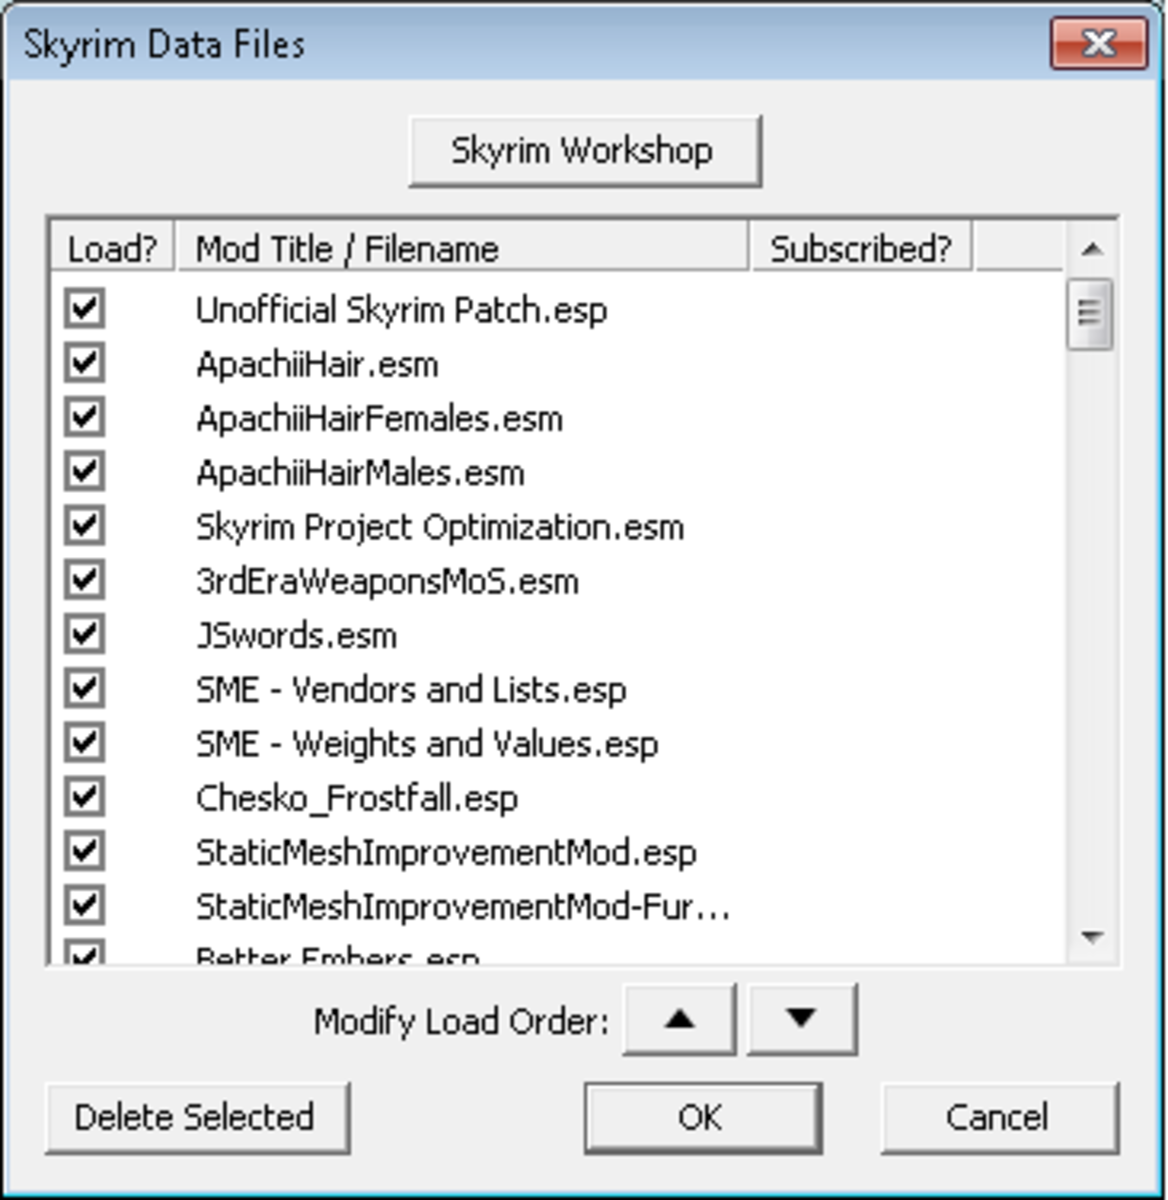 An example of a "Skyrim" mod load order.